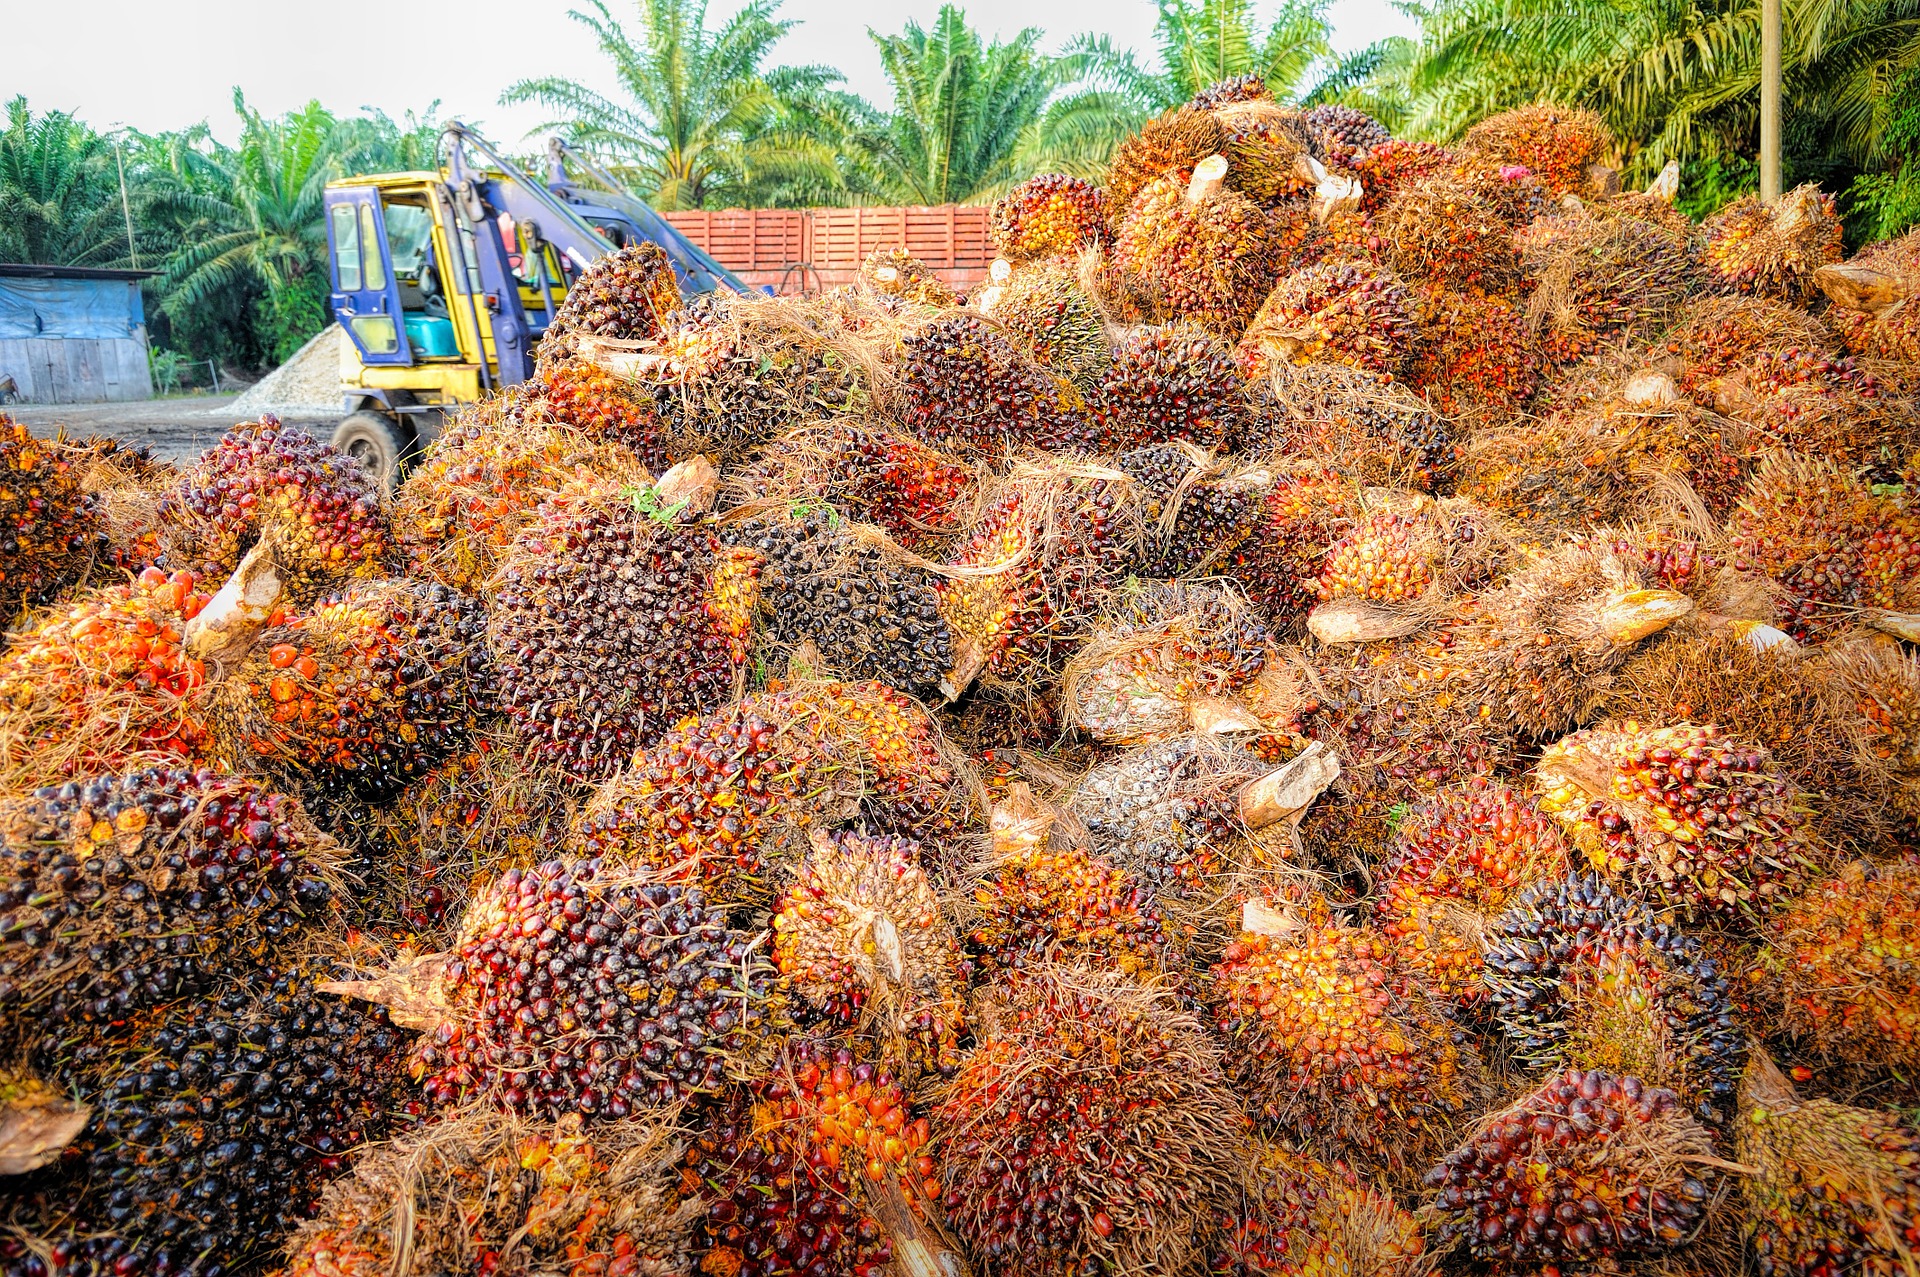 Indonesia, European Union agree to establish Joint Working Group on palm oil